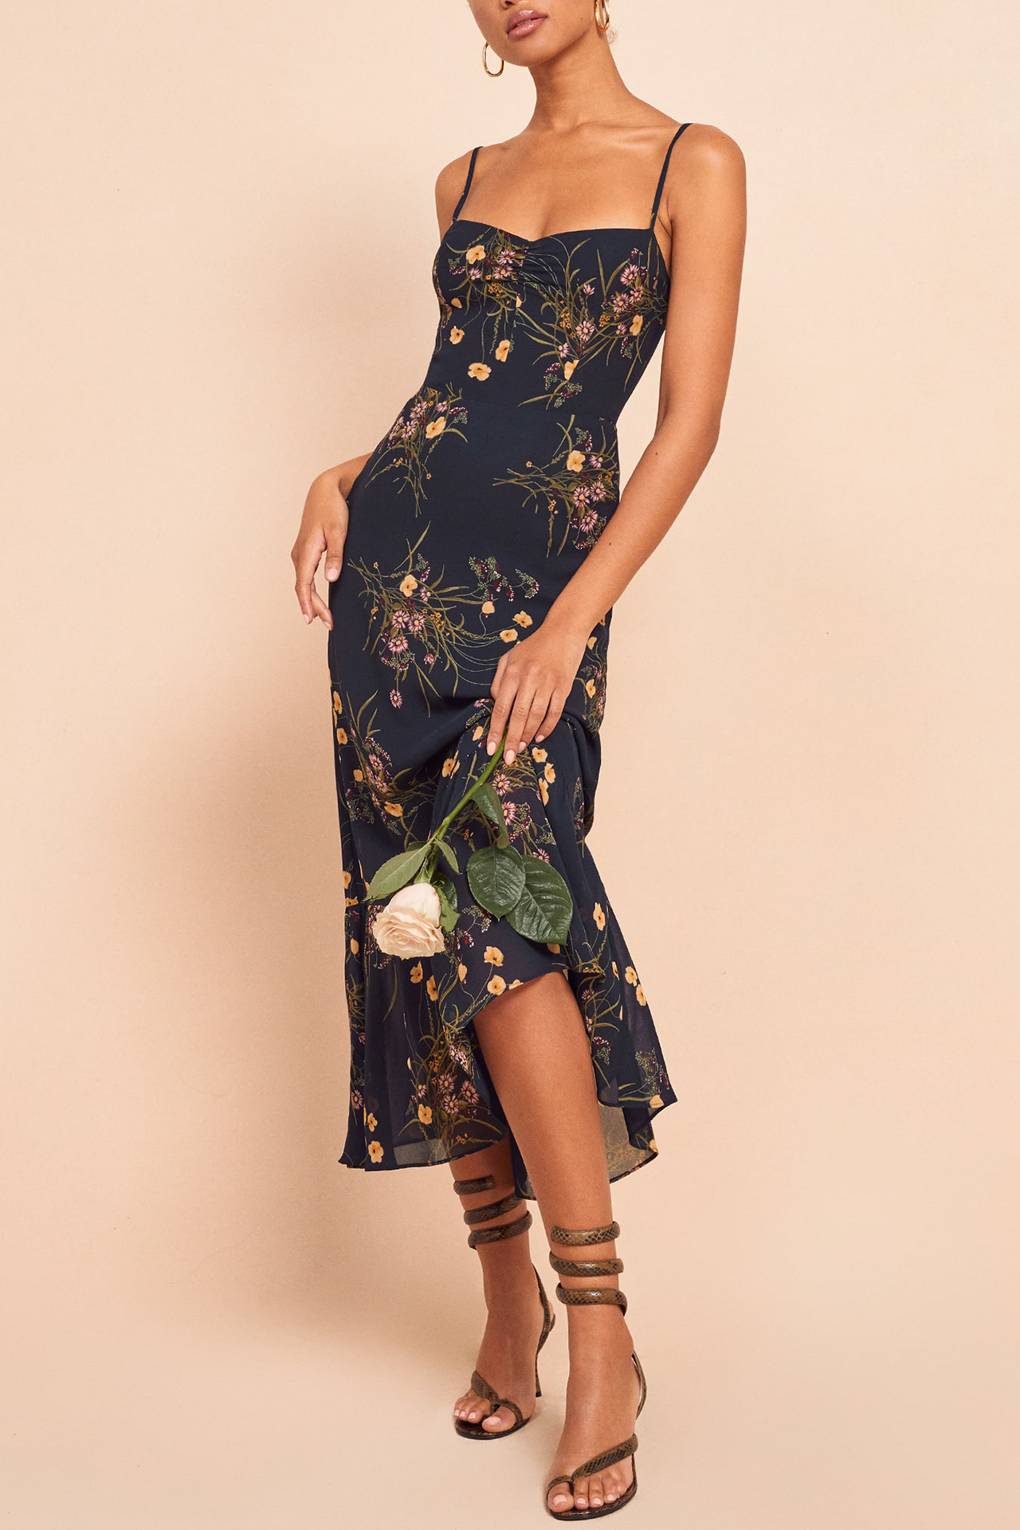 Reformation Released A Wedding Guest Dress Collection You